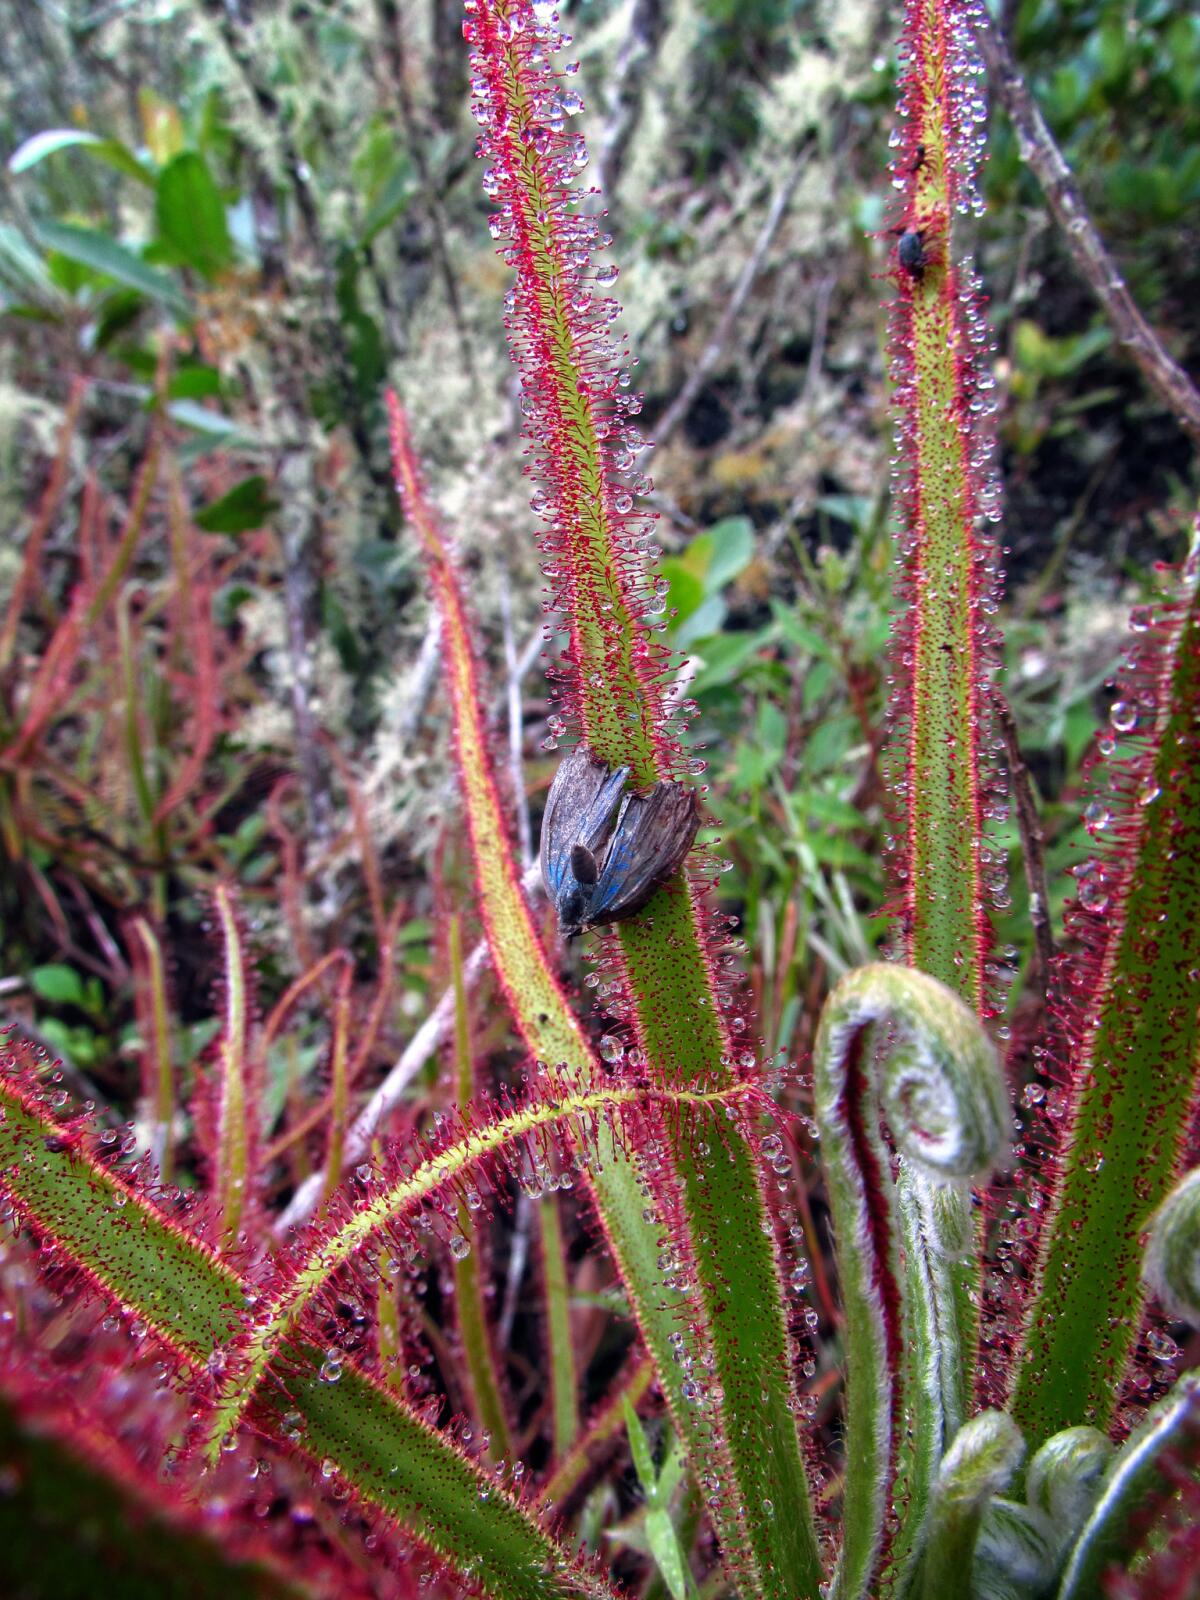 The giant sundew with prey, a small butterfly. (Paulo M. Gonella)